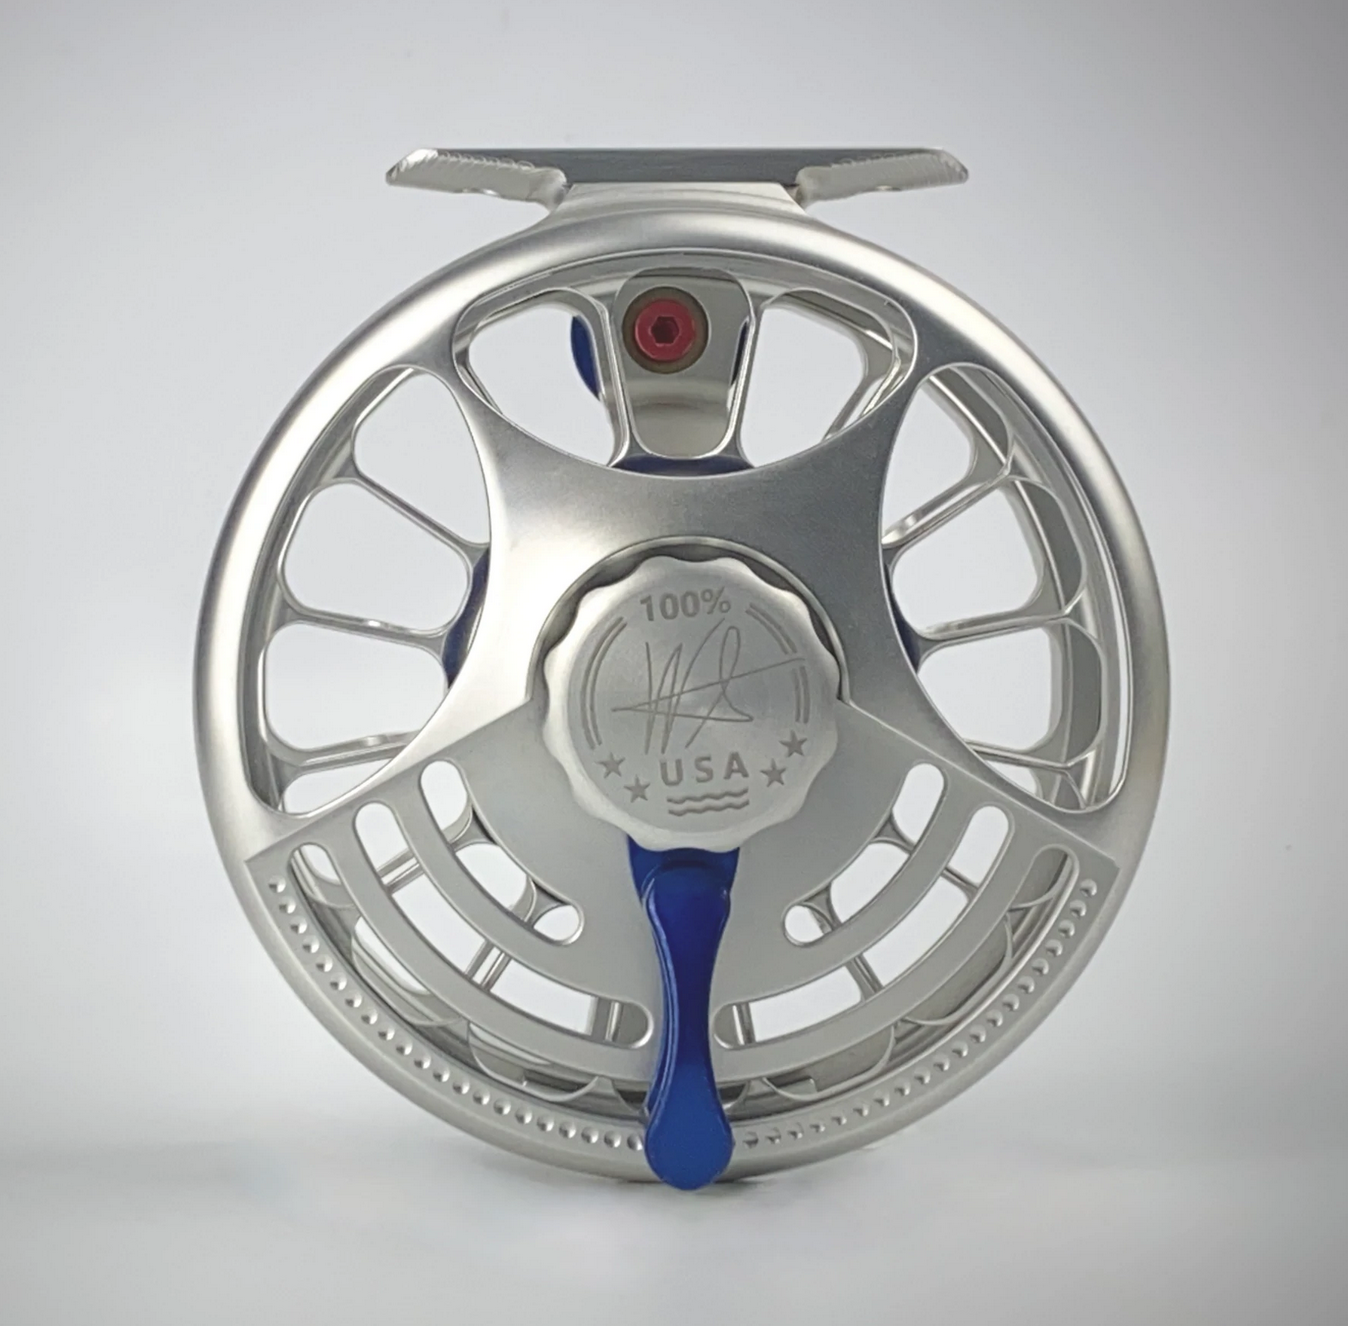 Seigler SF Small Fly Reel in Silver with Blue Accents